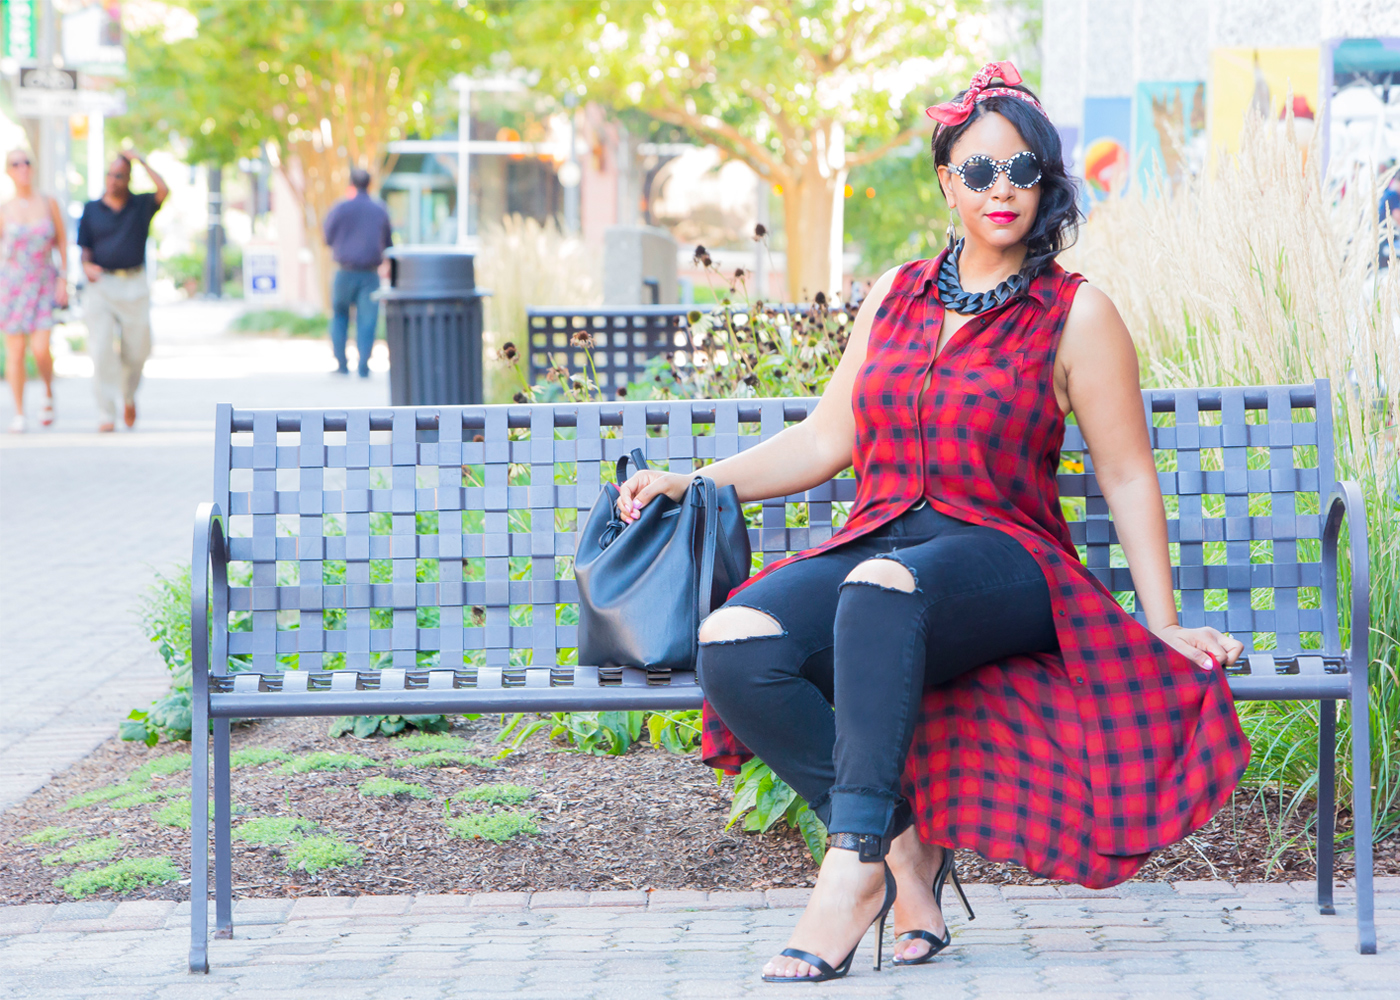 What I'm Wearing: 12 Ways to Wear Denim: Ripped Knee denim - MAC RiRi Woo lipstick, Bandana, Mossimo Supply Co. Sleeveless Plaid Duster, Ripped Knee Jeans, GUESS Odeum Ankle Strap Sandals, Black and White Print Sunglasses, Drawstring bucket bag, Matte Black Link Necklace